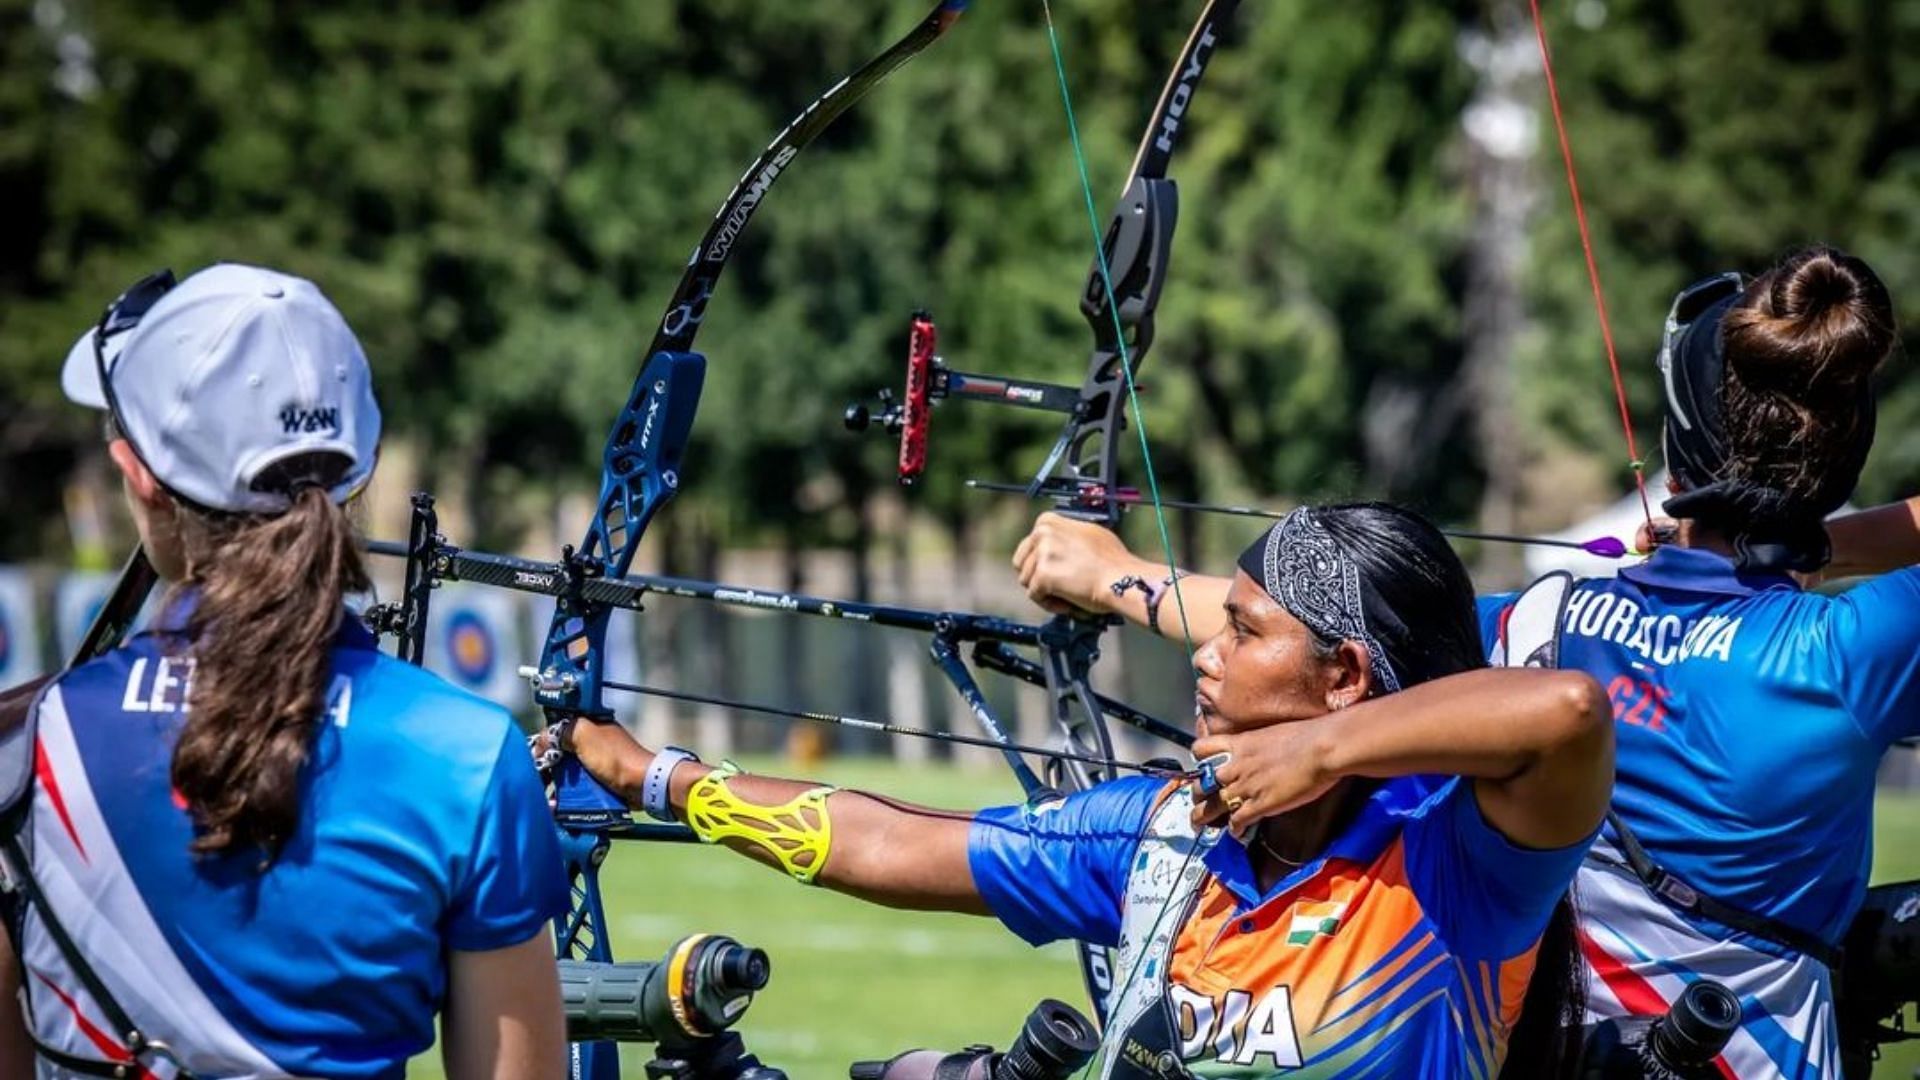 Indian recurve archery teams on the brink of Paris 2024 Olympics qualification (Image via Indian Archery/ Instagram)